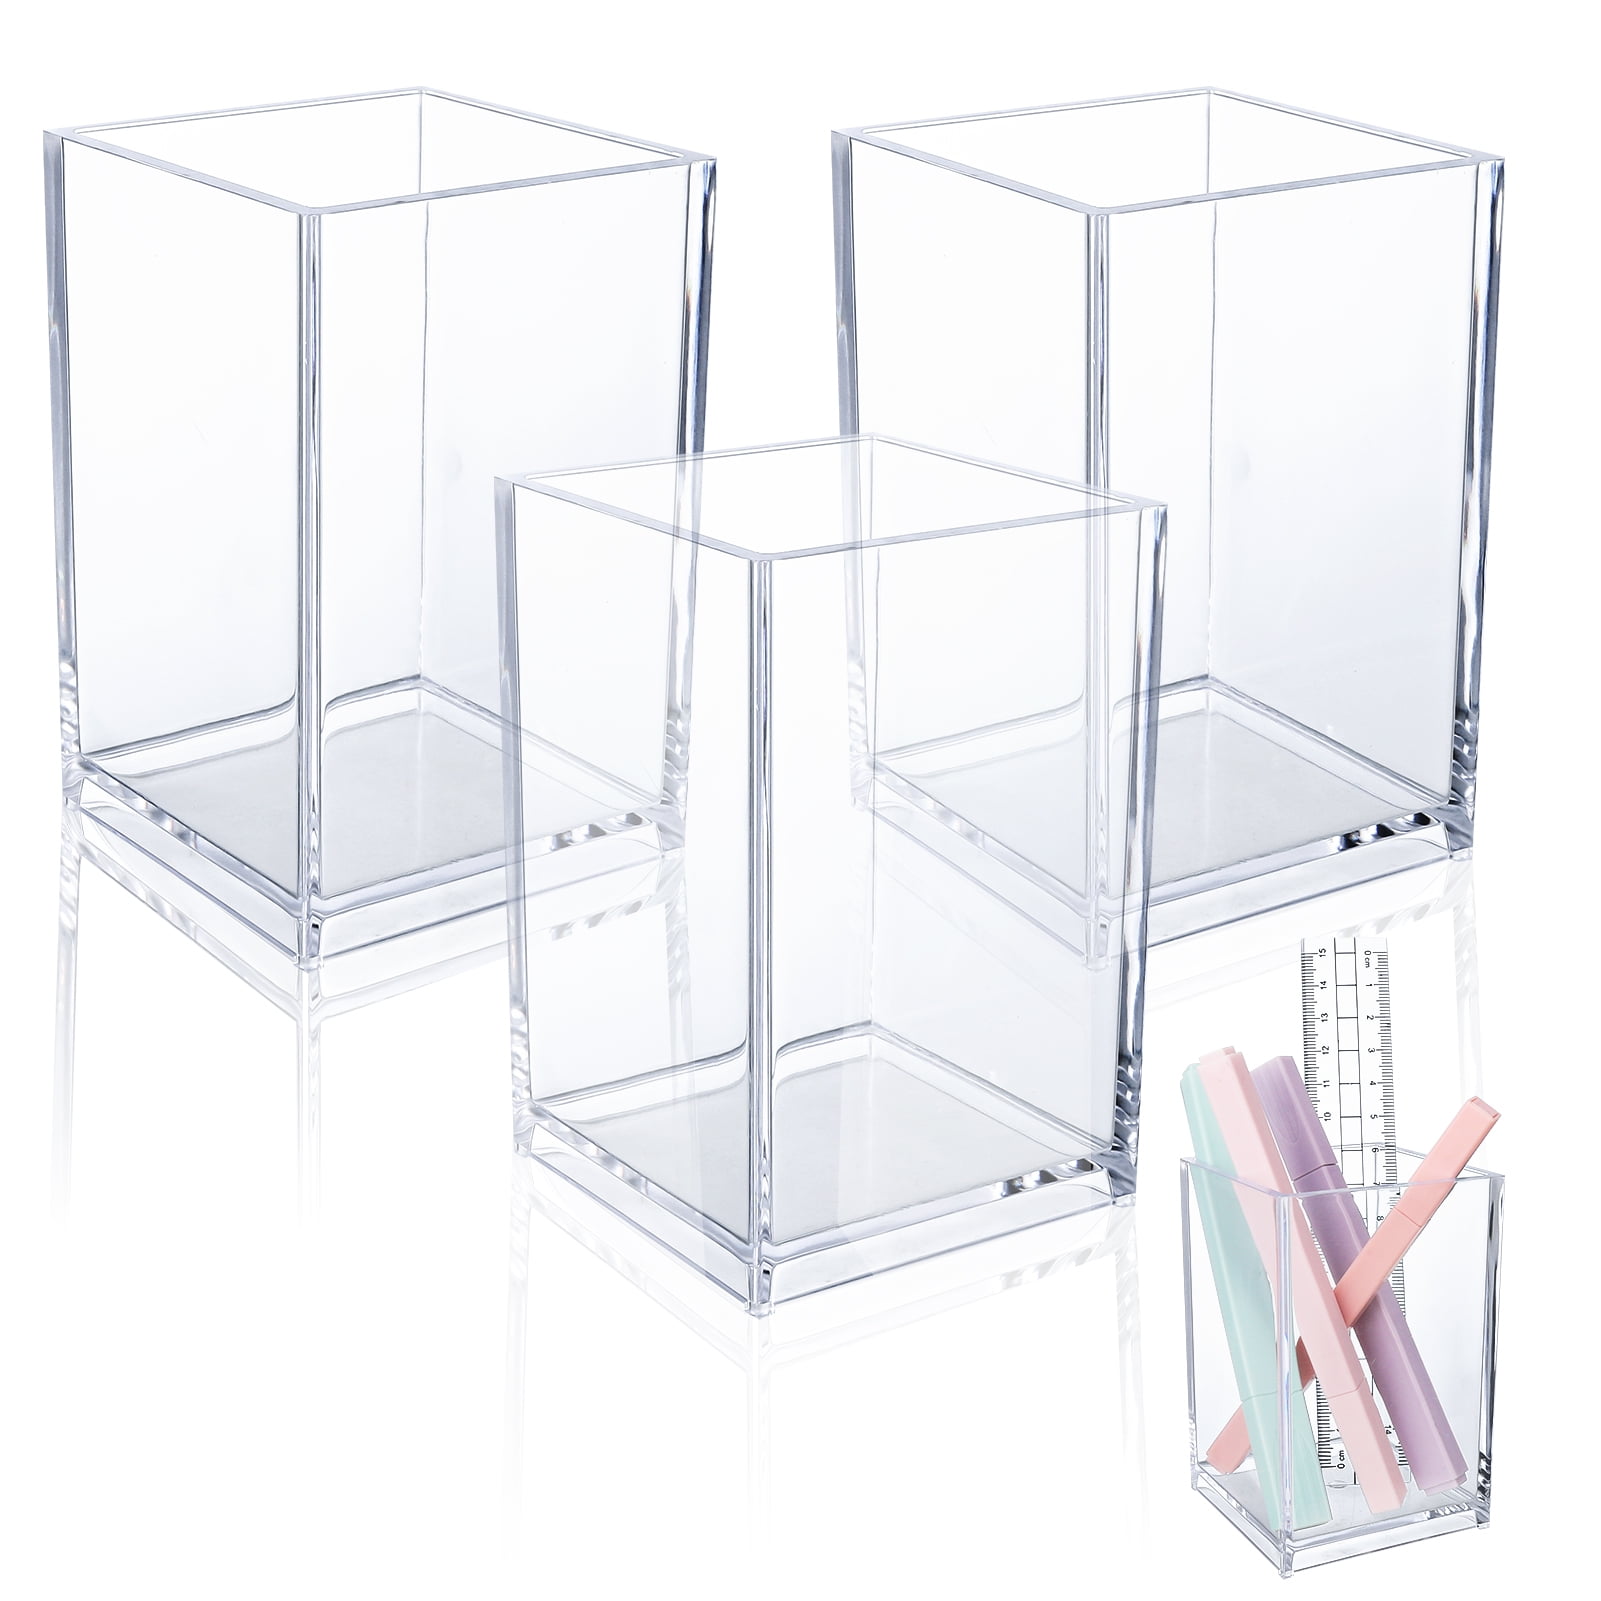 Clear Acrylic Pen Holder for Desk and Office Organization (2.9 x 3.8 x 8.9  in), PACK - Kroger